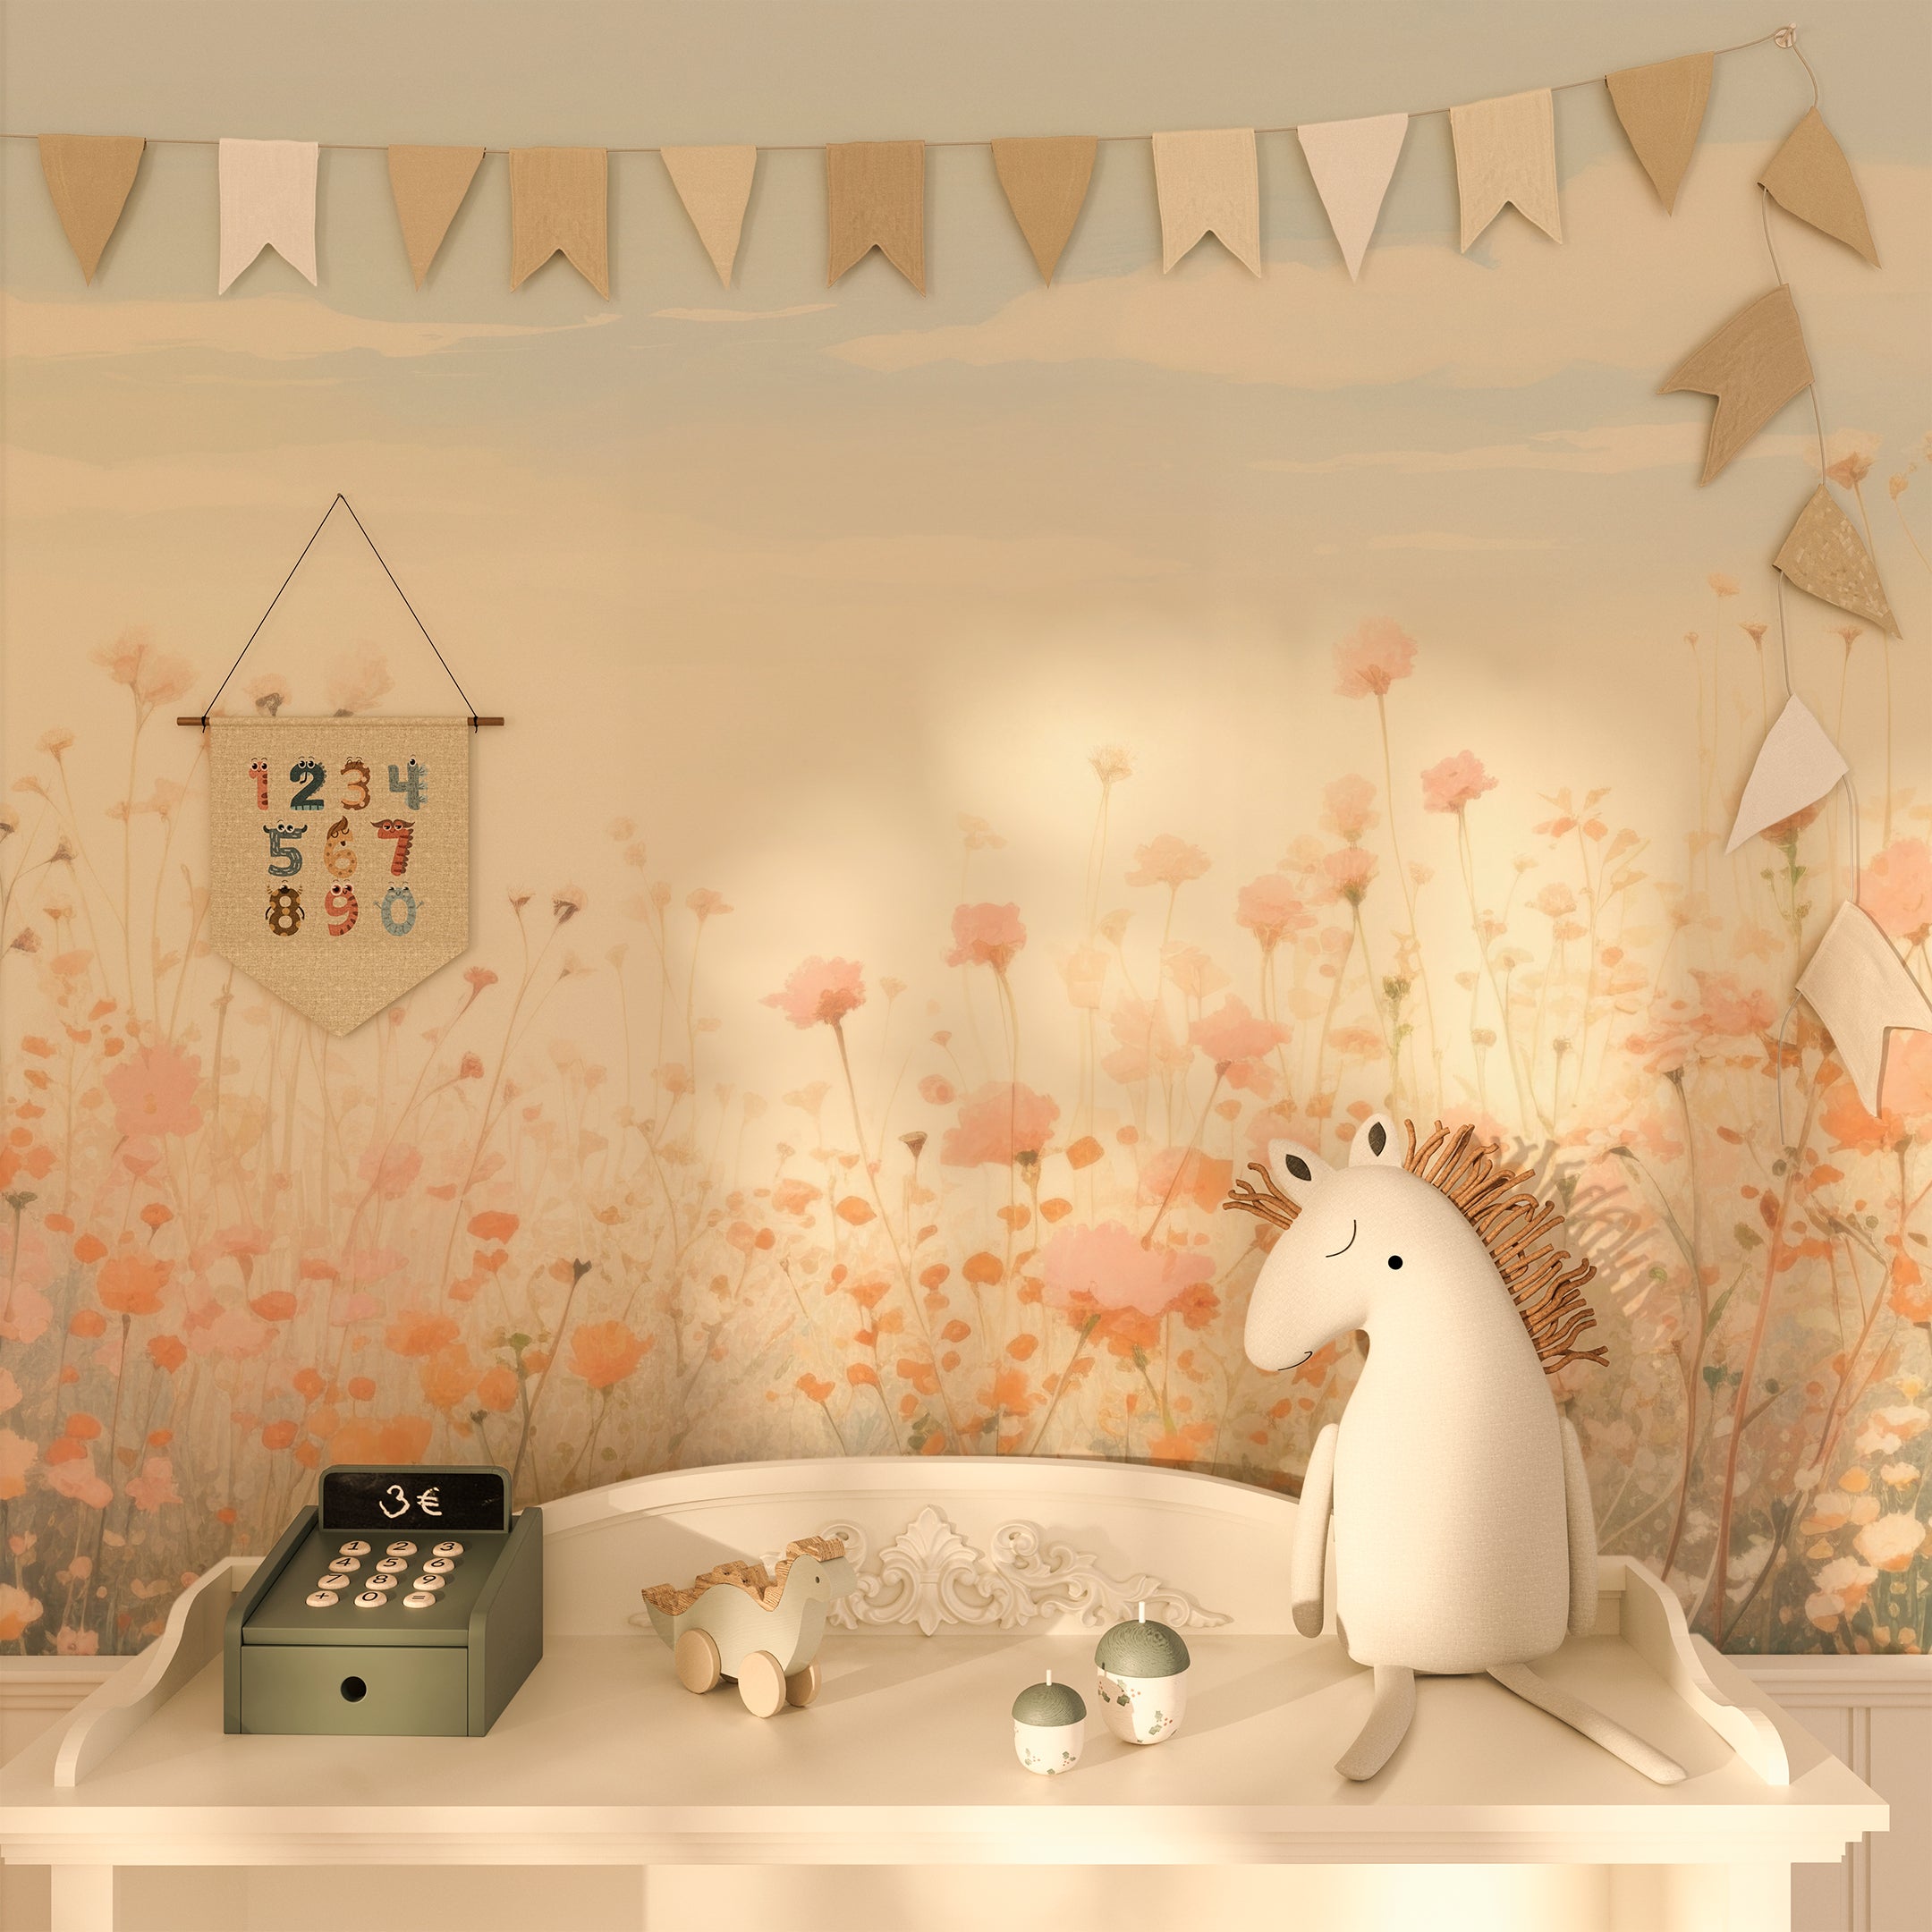 "Wildflower meadow mural in a children's room setting with toys and decorative items."